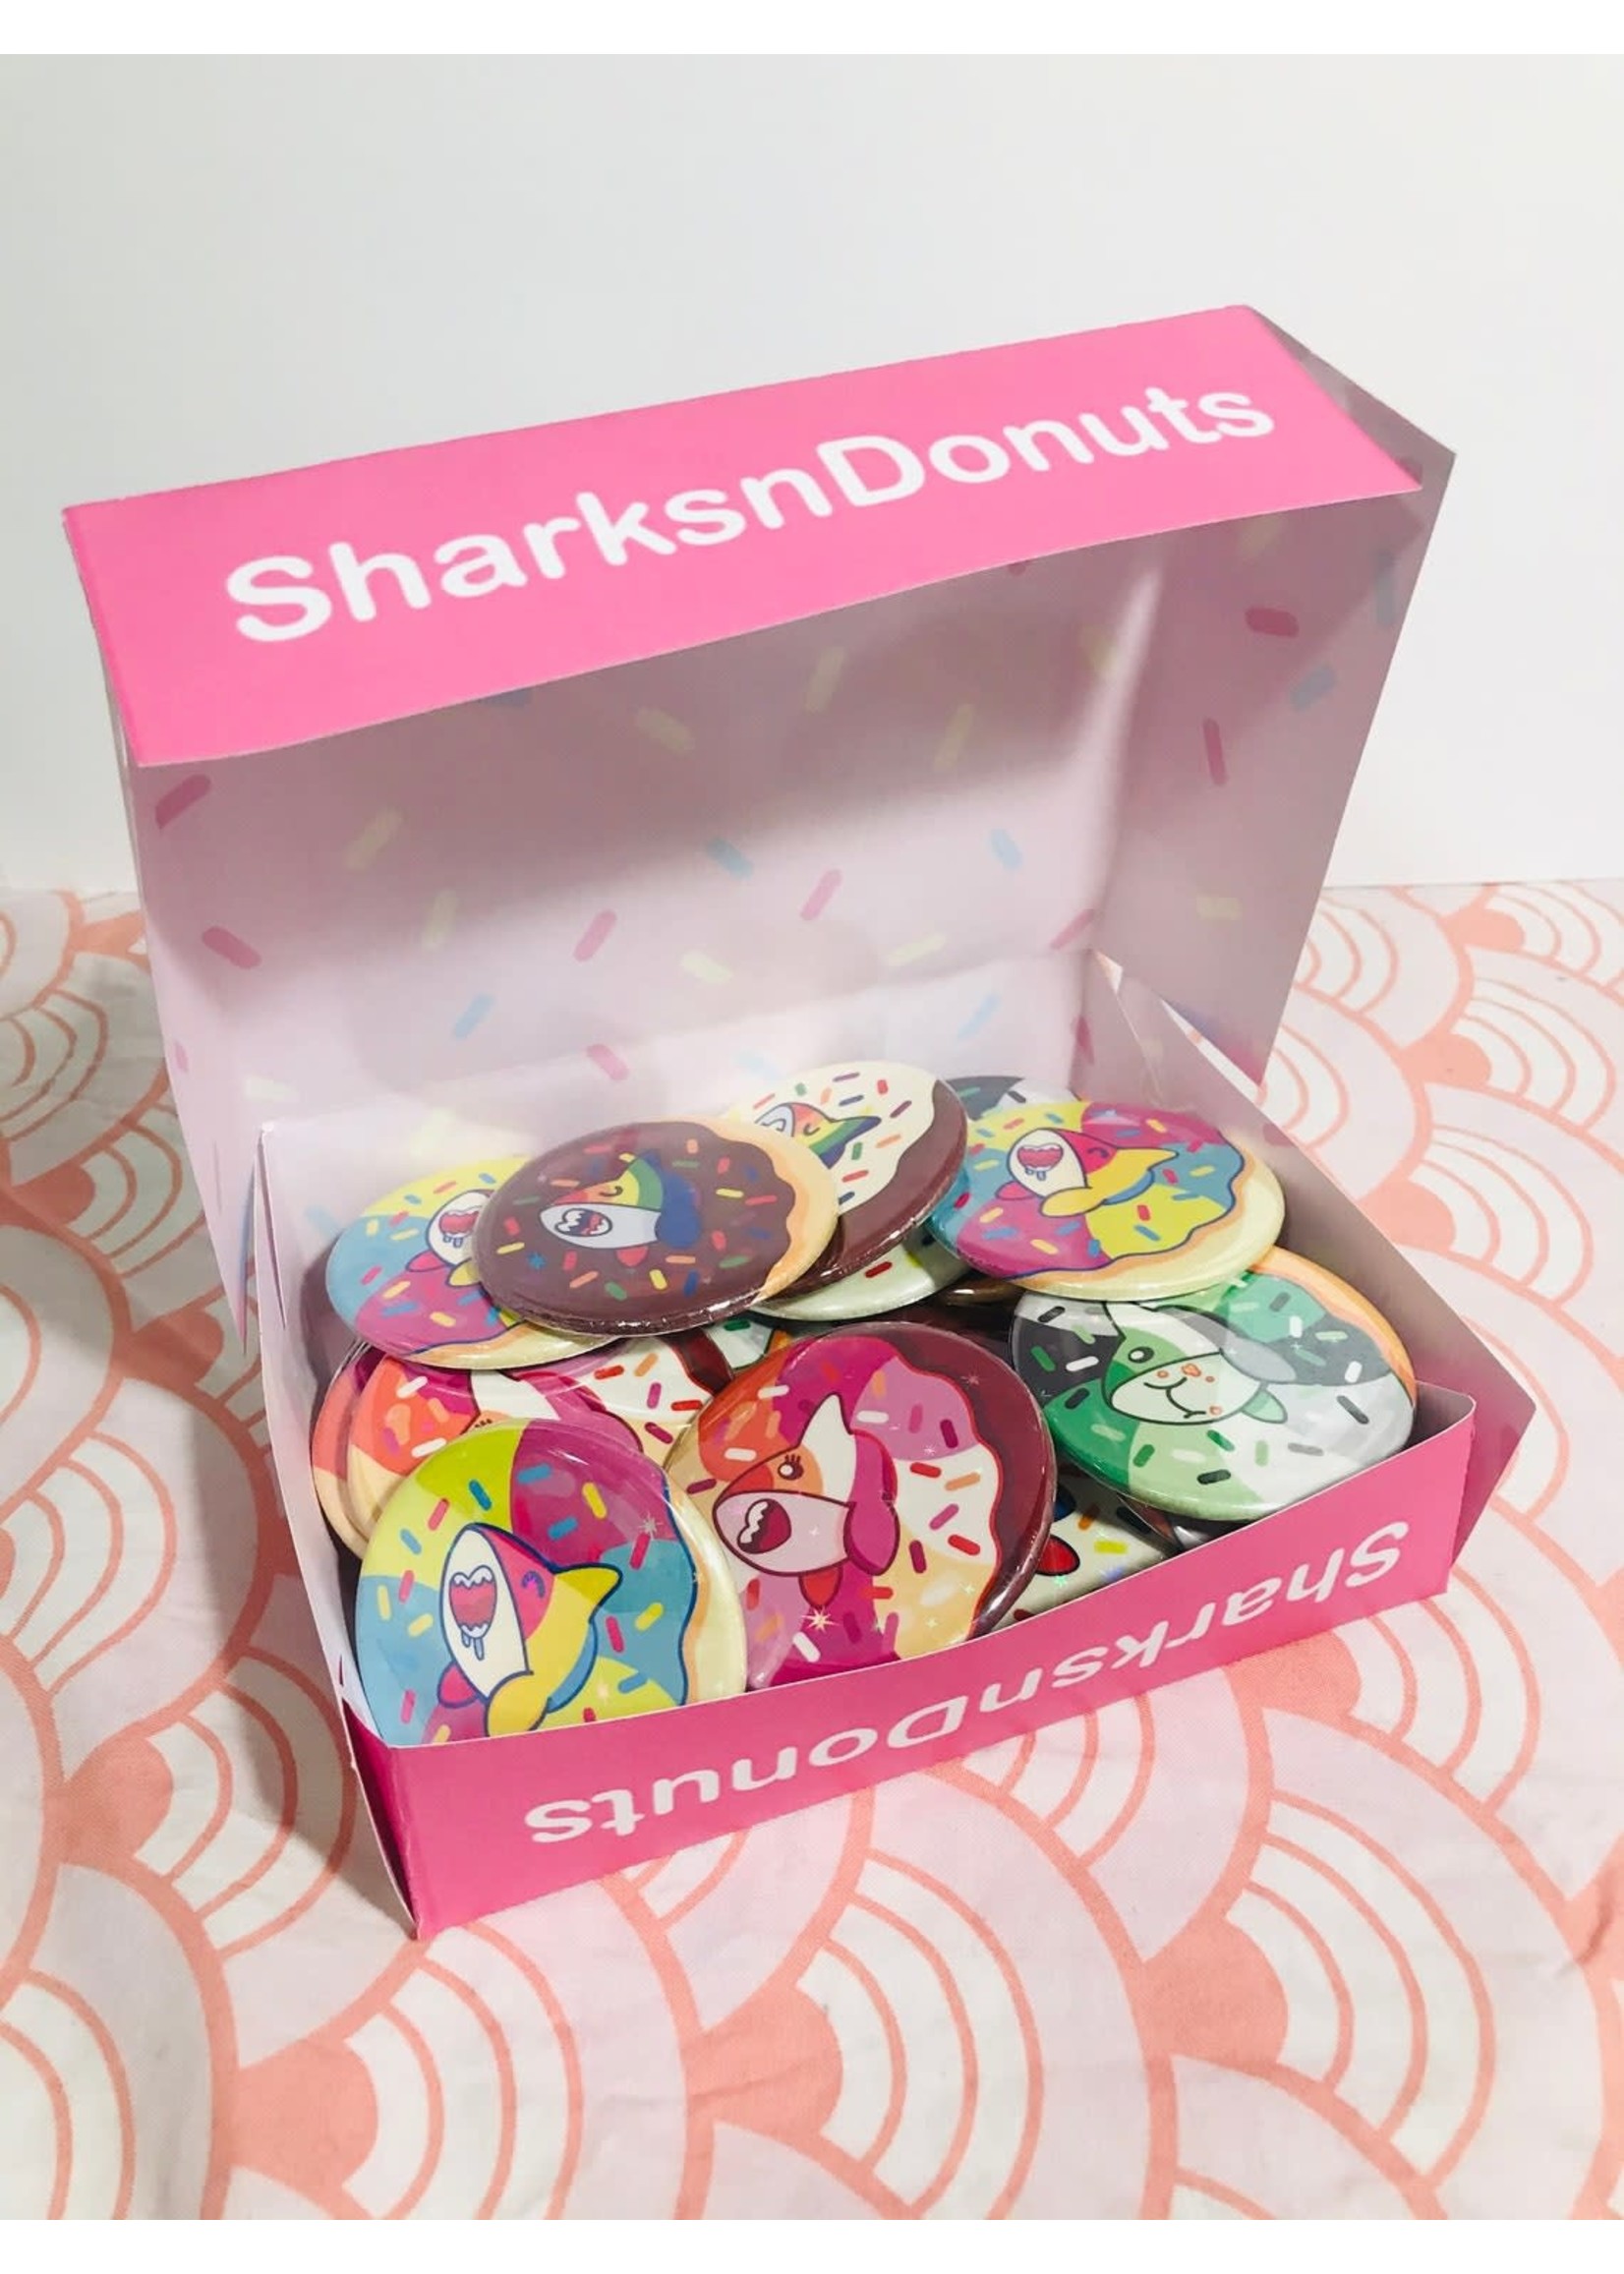 SHARKNDONUTS Pride Sharks and Donut Buttons Bisexual